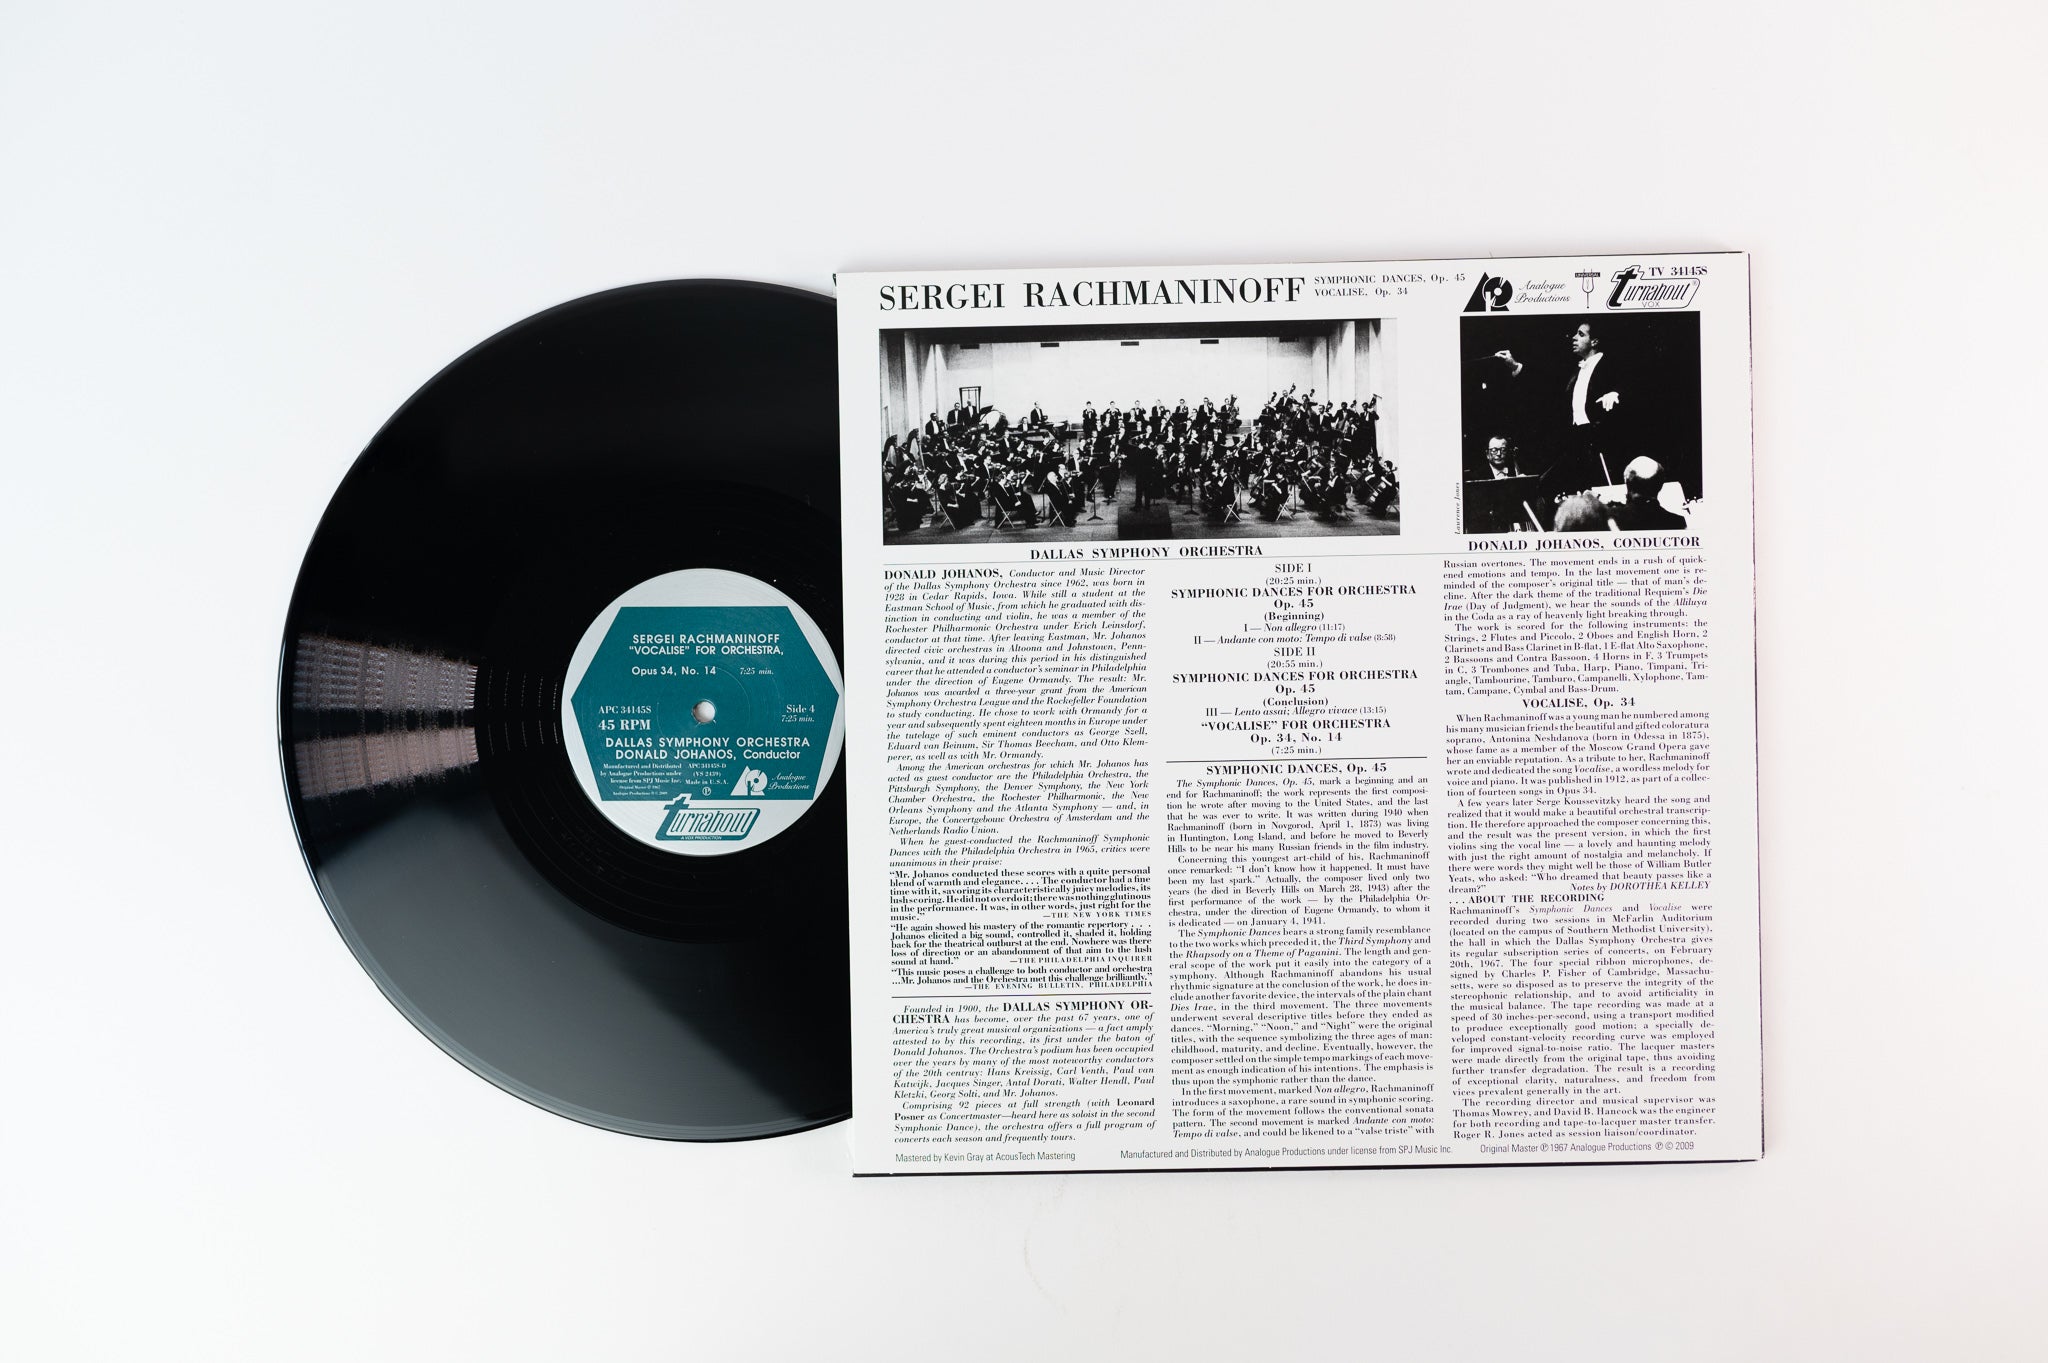 Sergei Vasilyevich Rachmaninoff - Symphonic Dances / Vocalise on Turnabout Vox Analogue Productions Reissue